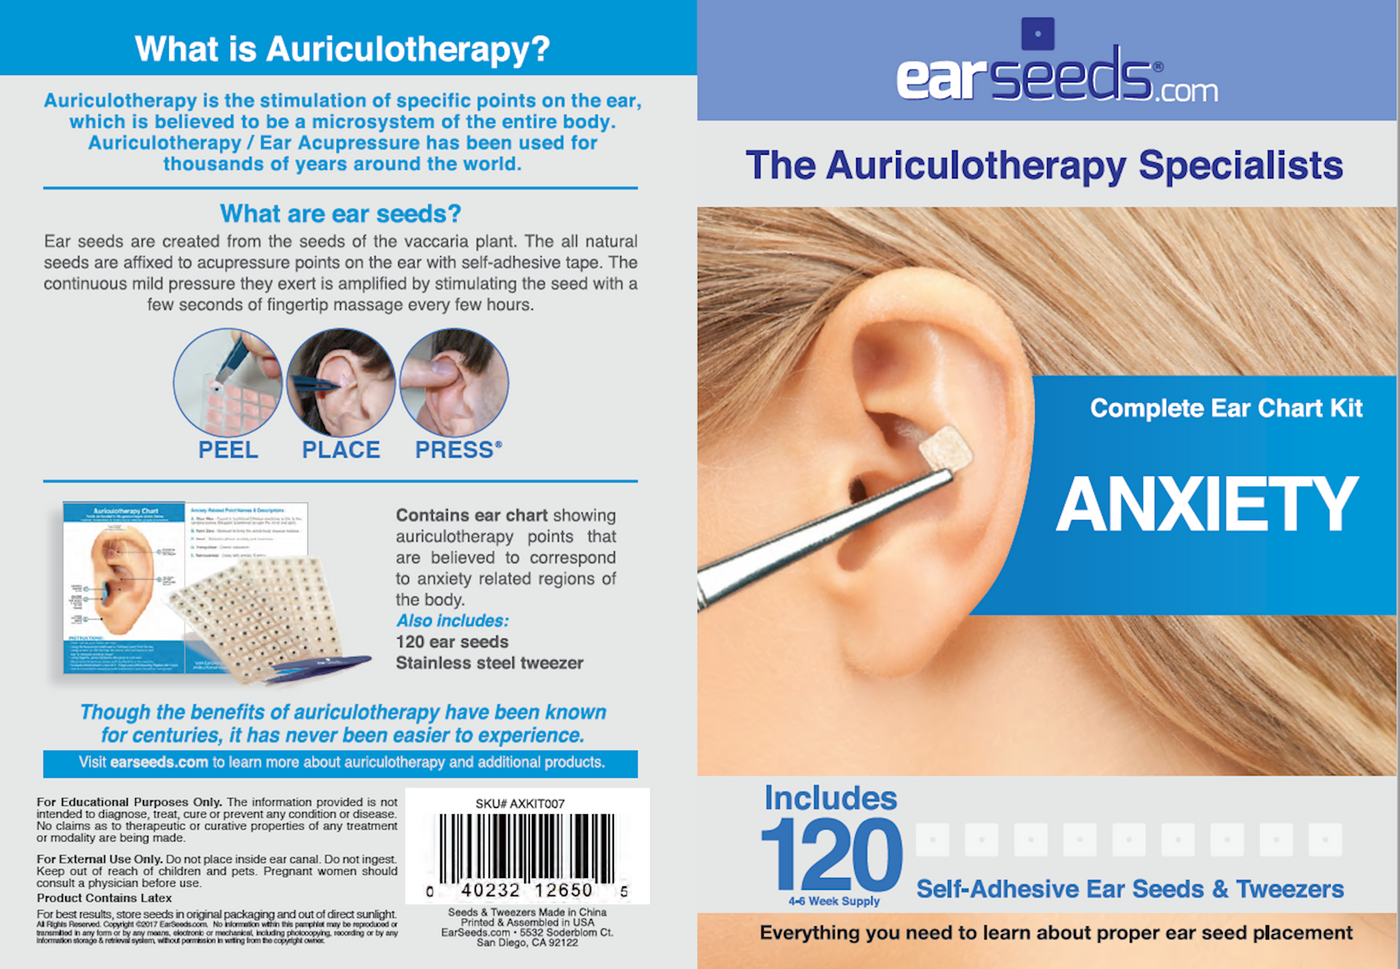 Anxiety Ear Seed 1 Kit Curated Wellness